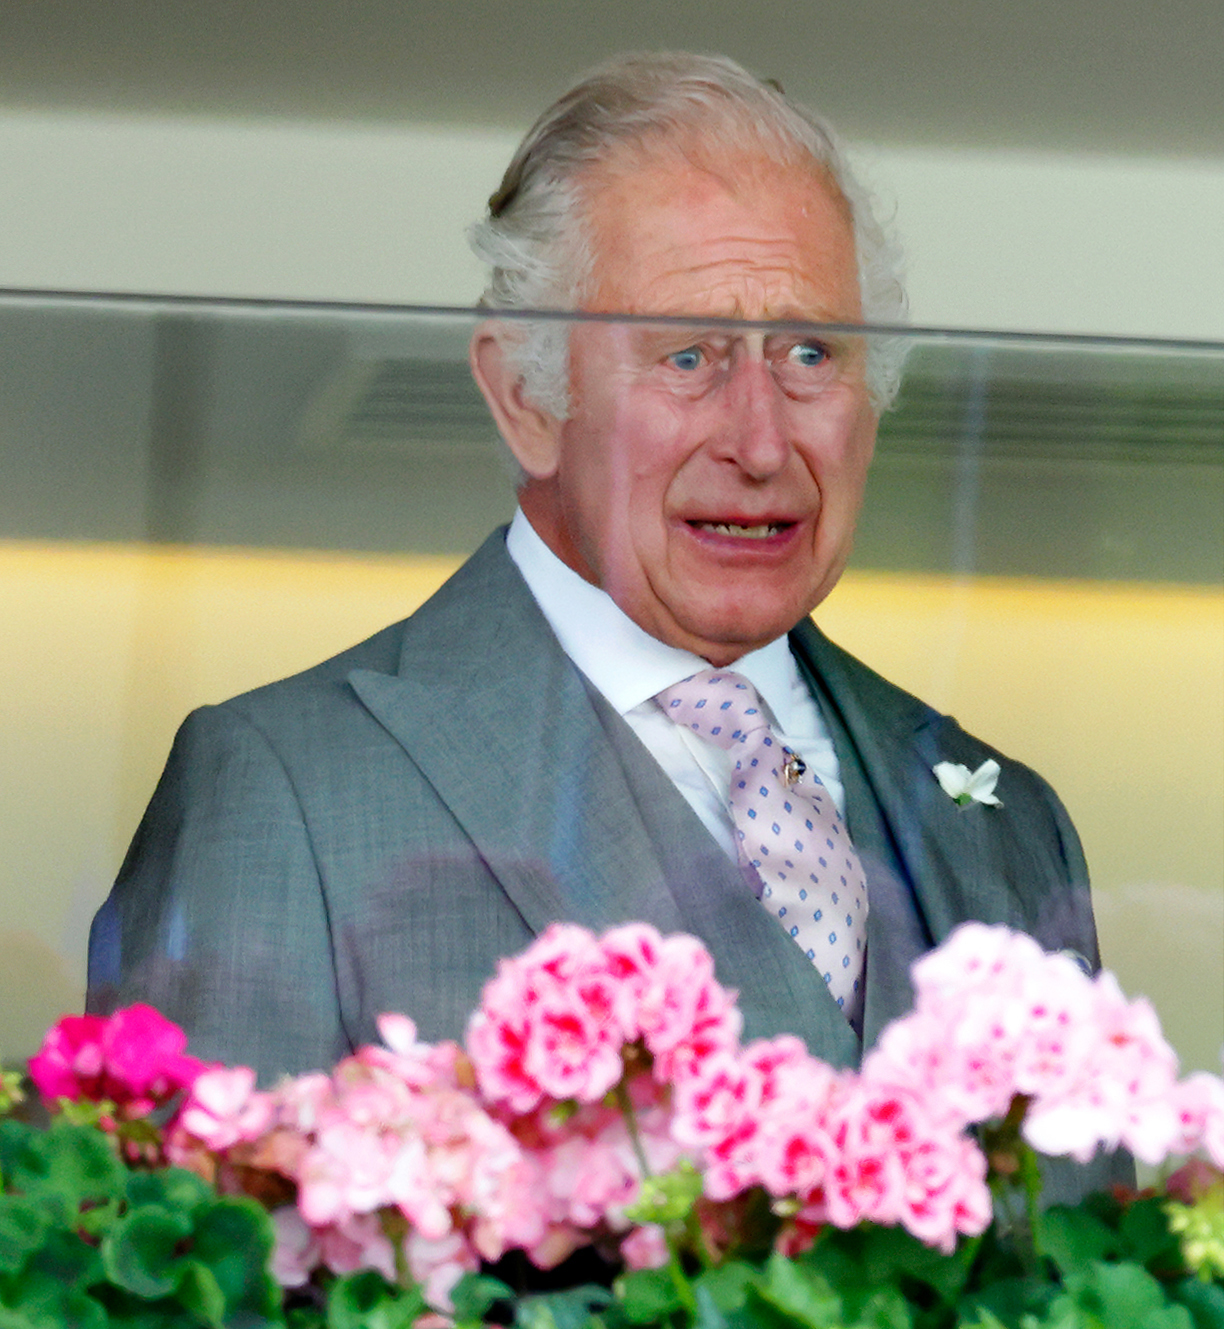 King Charles III at Royal Ascot on June 22, 2023 | Source: Getty Images